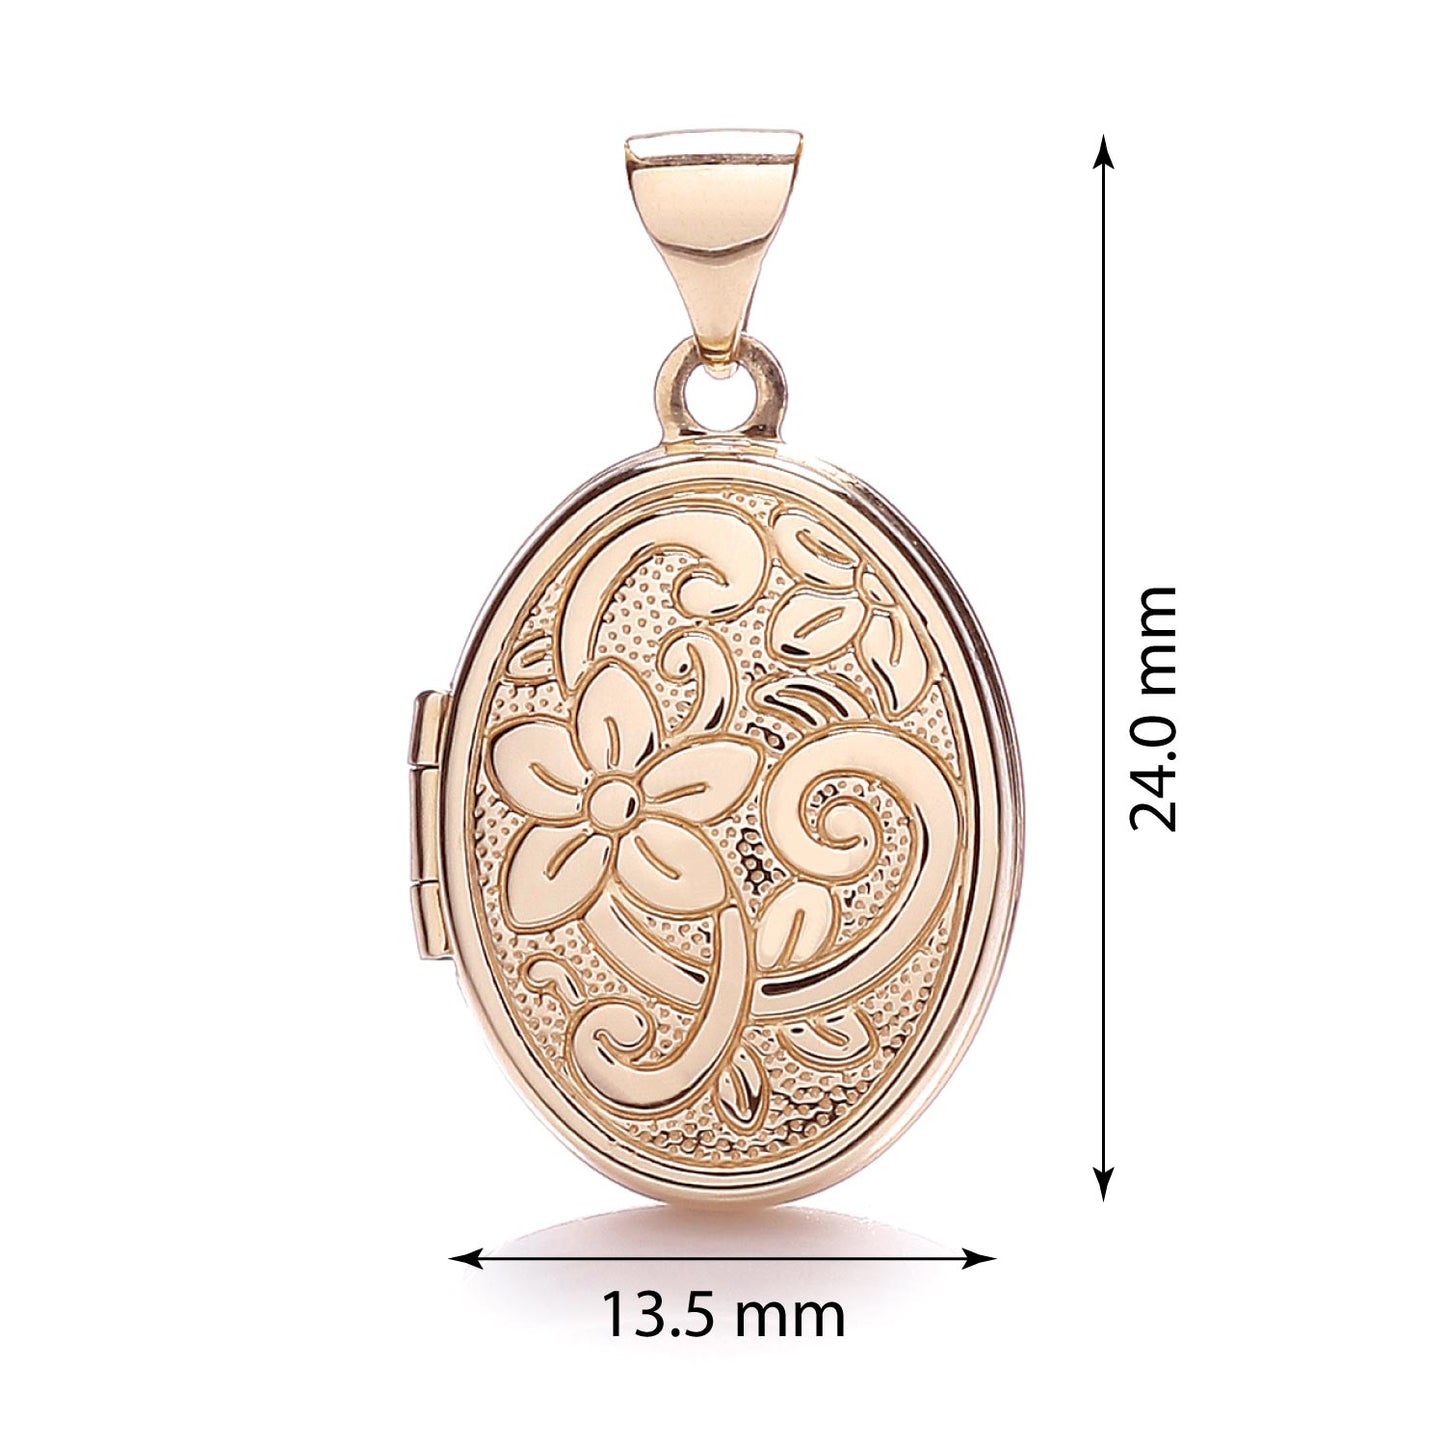 9ct Gold Oval Shaped Patterned Locket